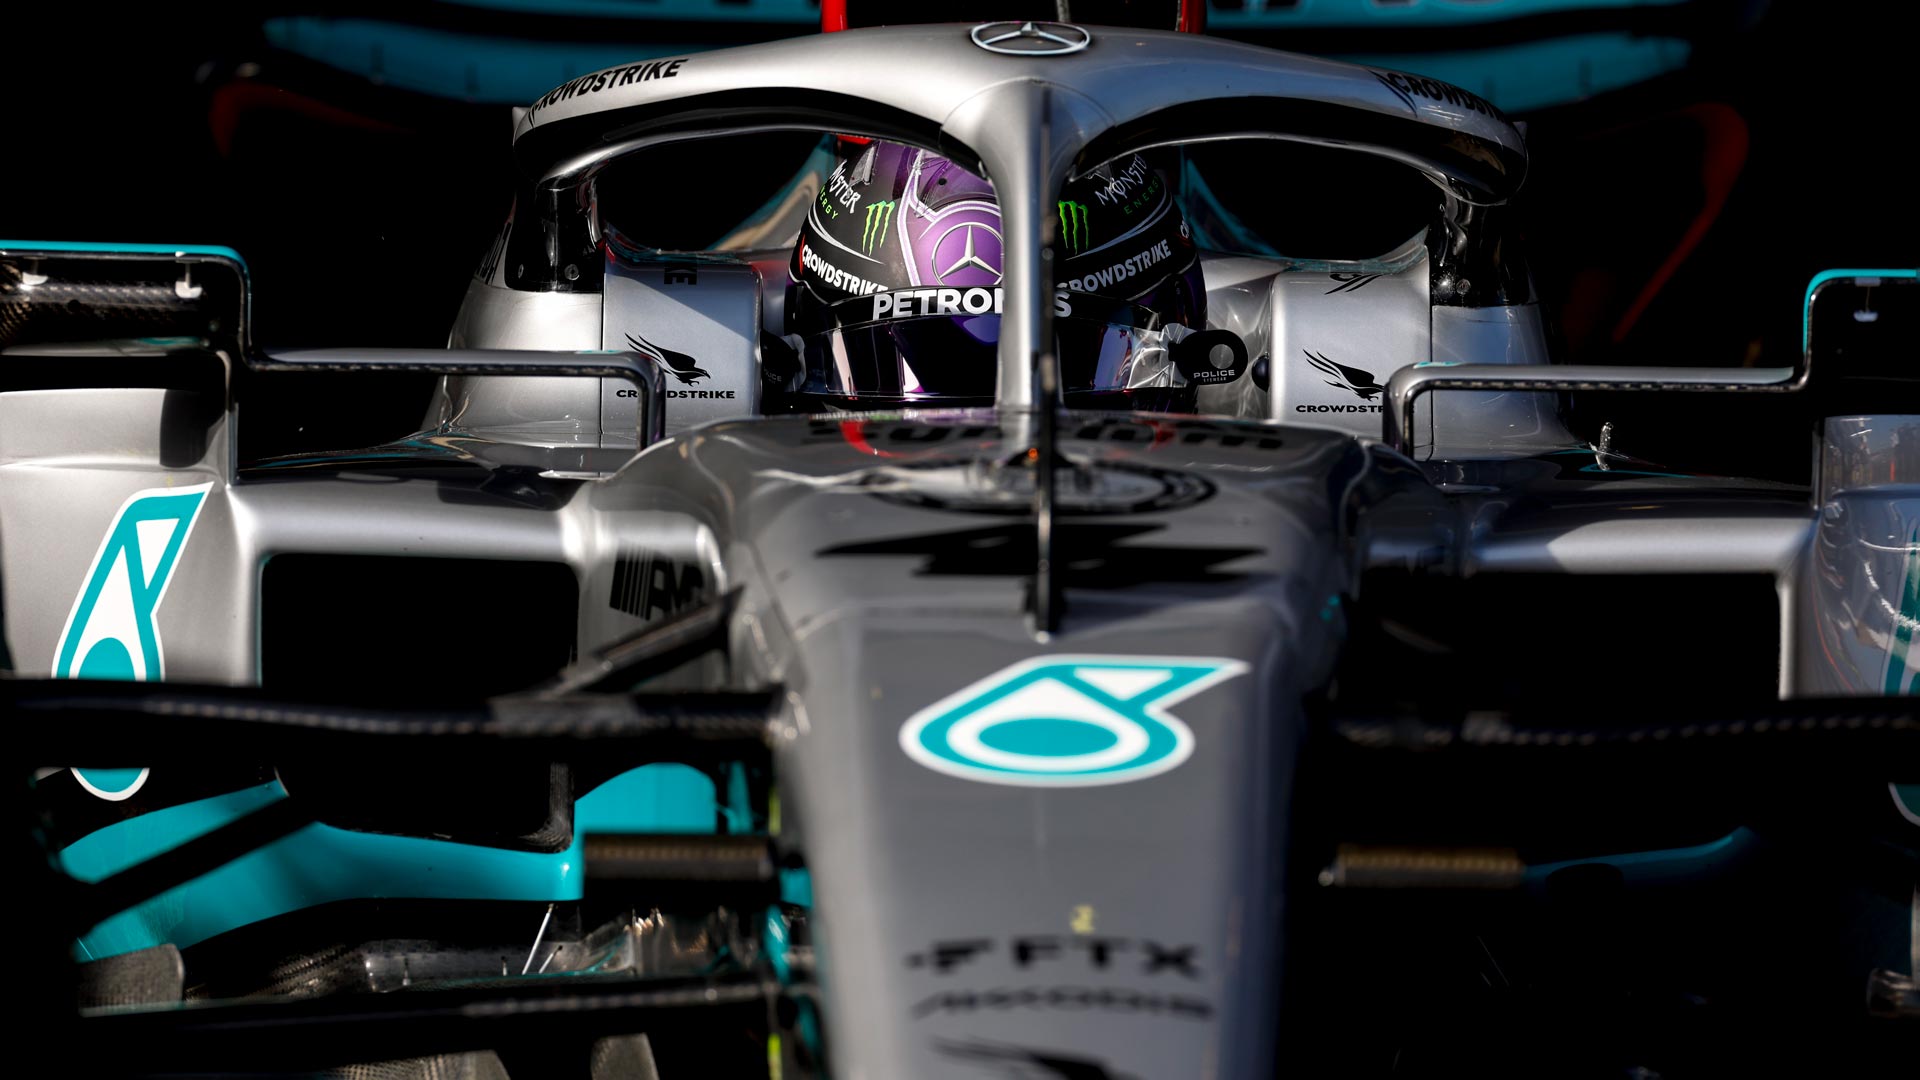 Mercedes 'don't make mistakes' says Hamilton, as he backs team to deliver more success. Formula 1®